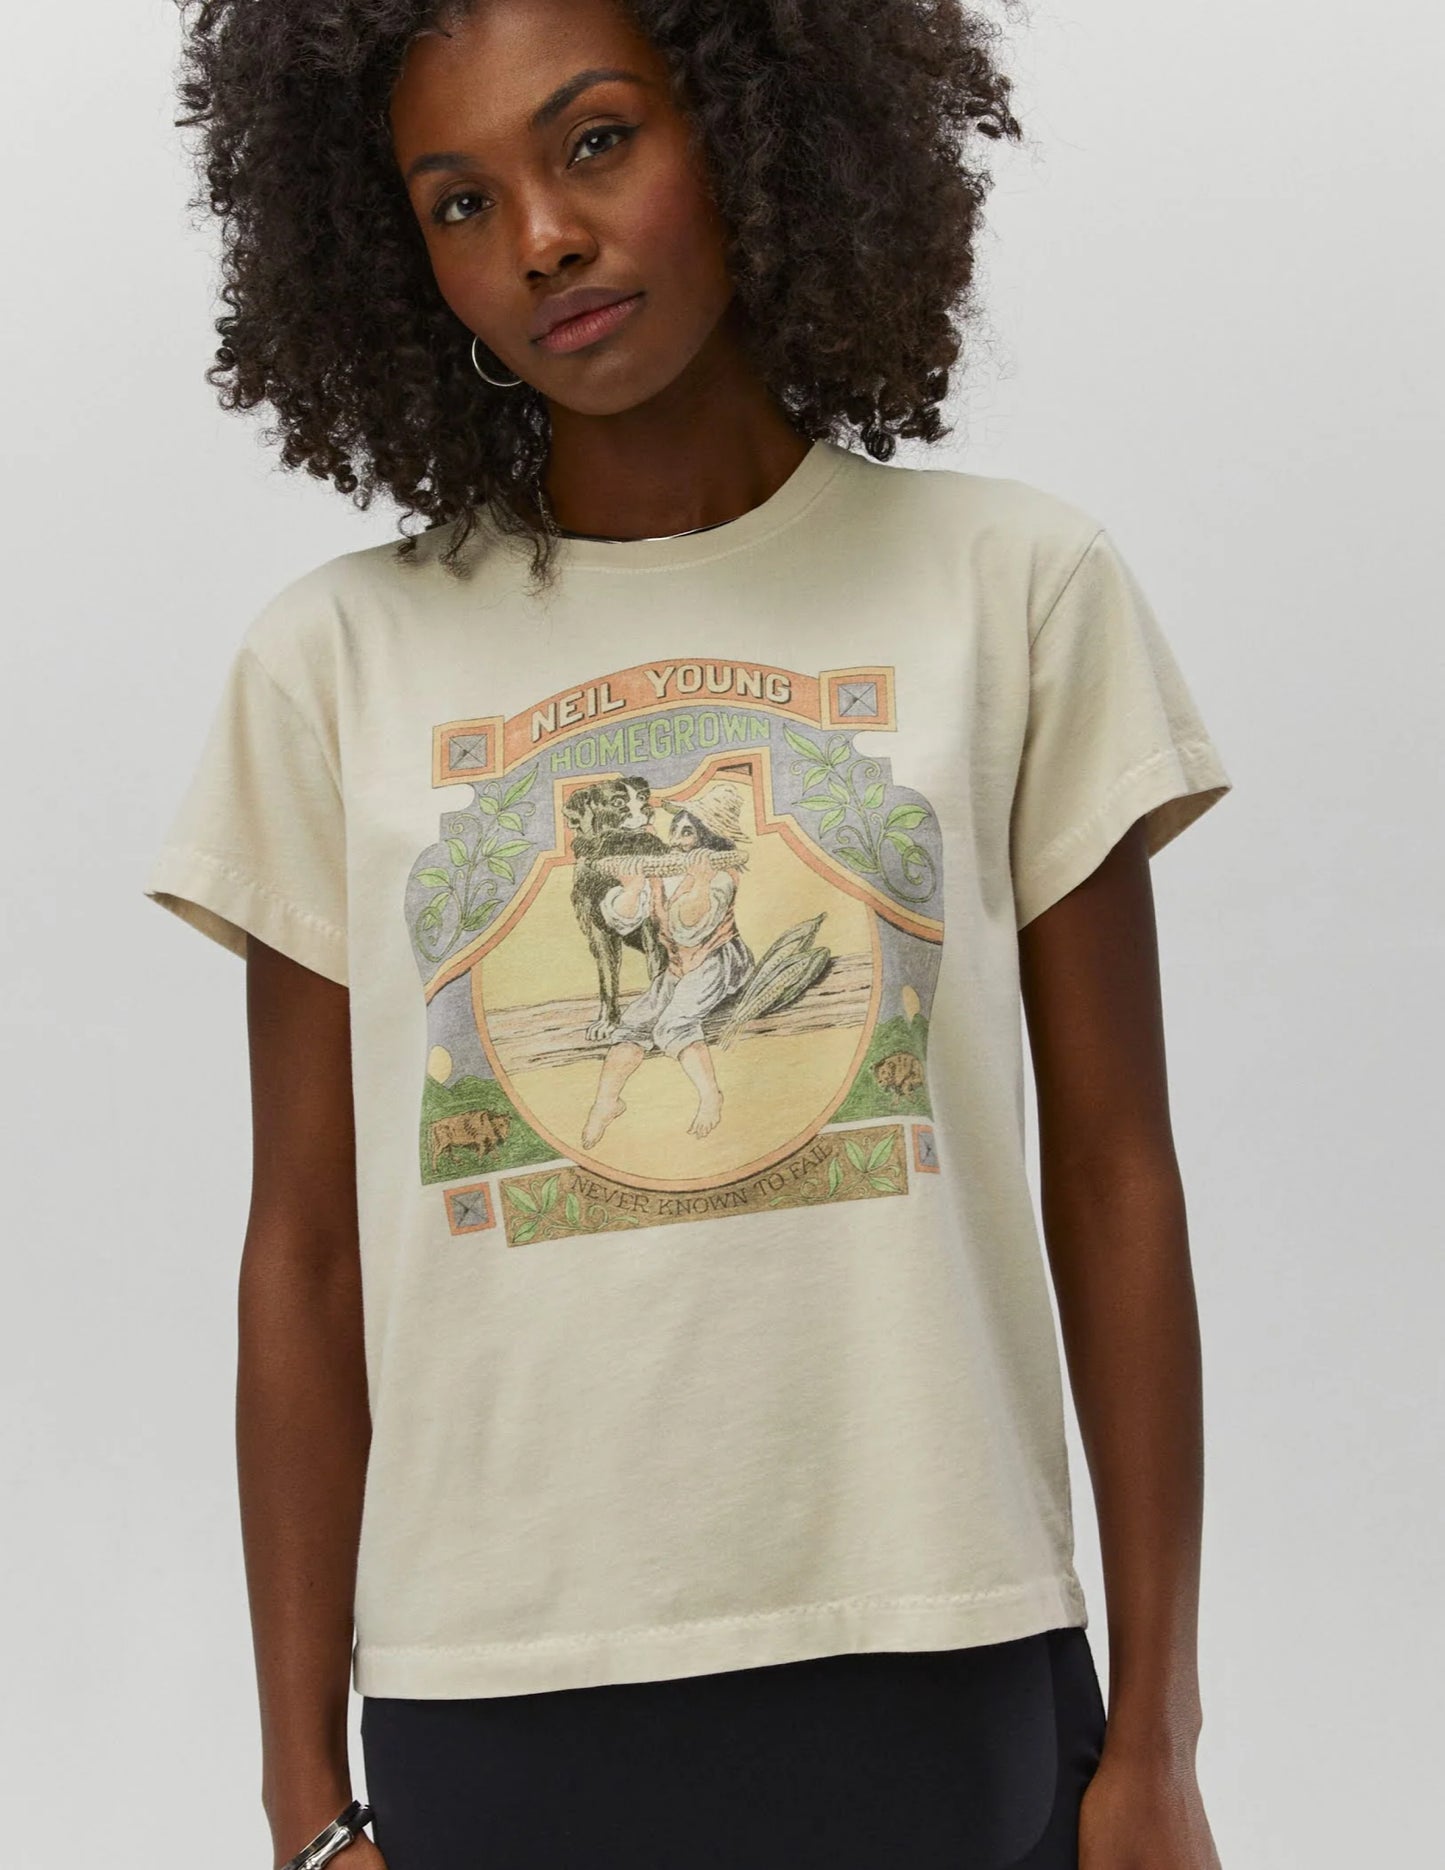 NEIL YOUNG HOME GROWN TOUR DAYDREAMER TEE